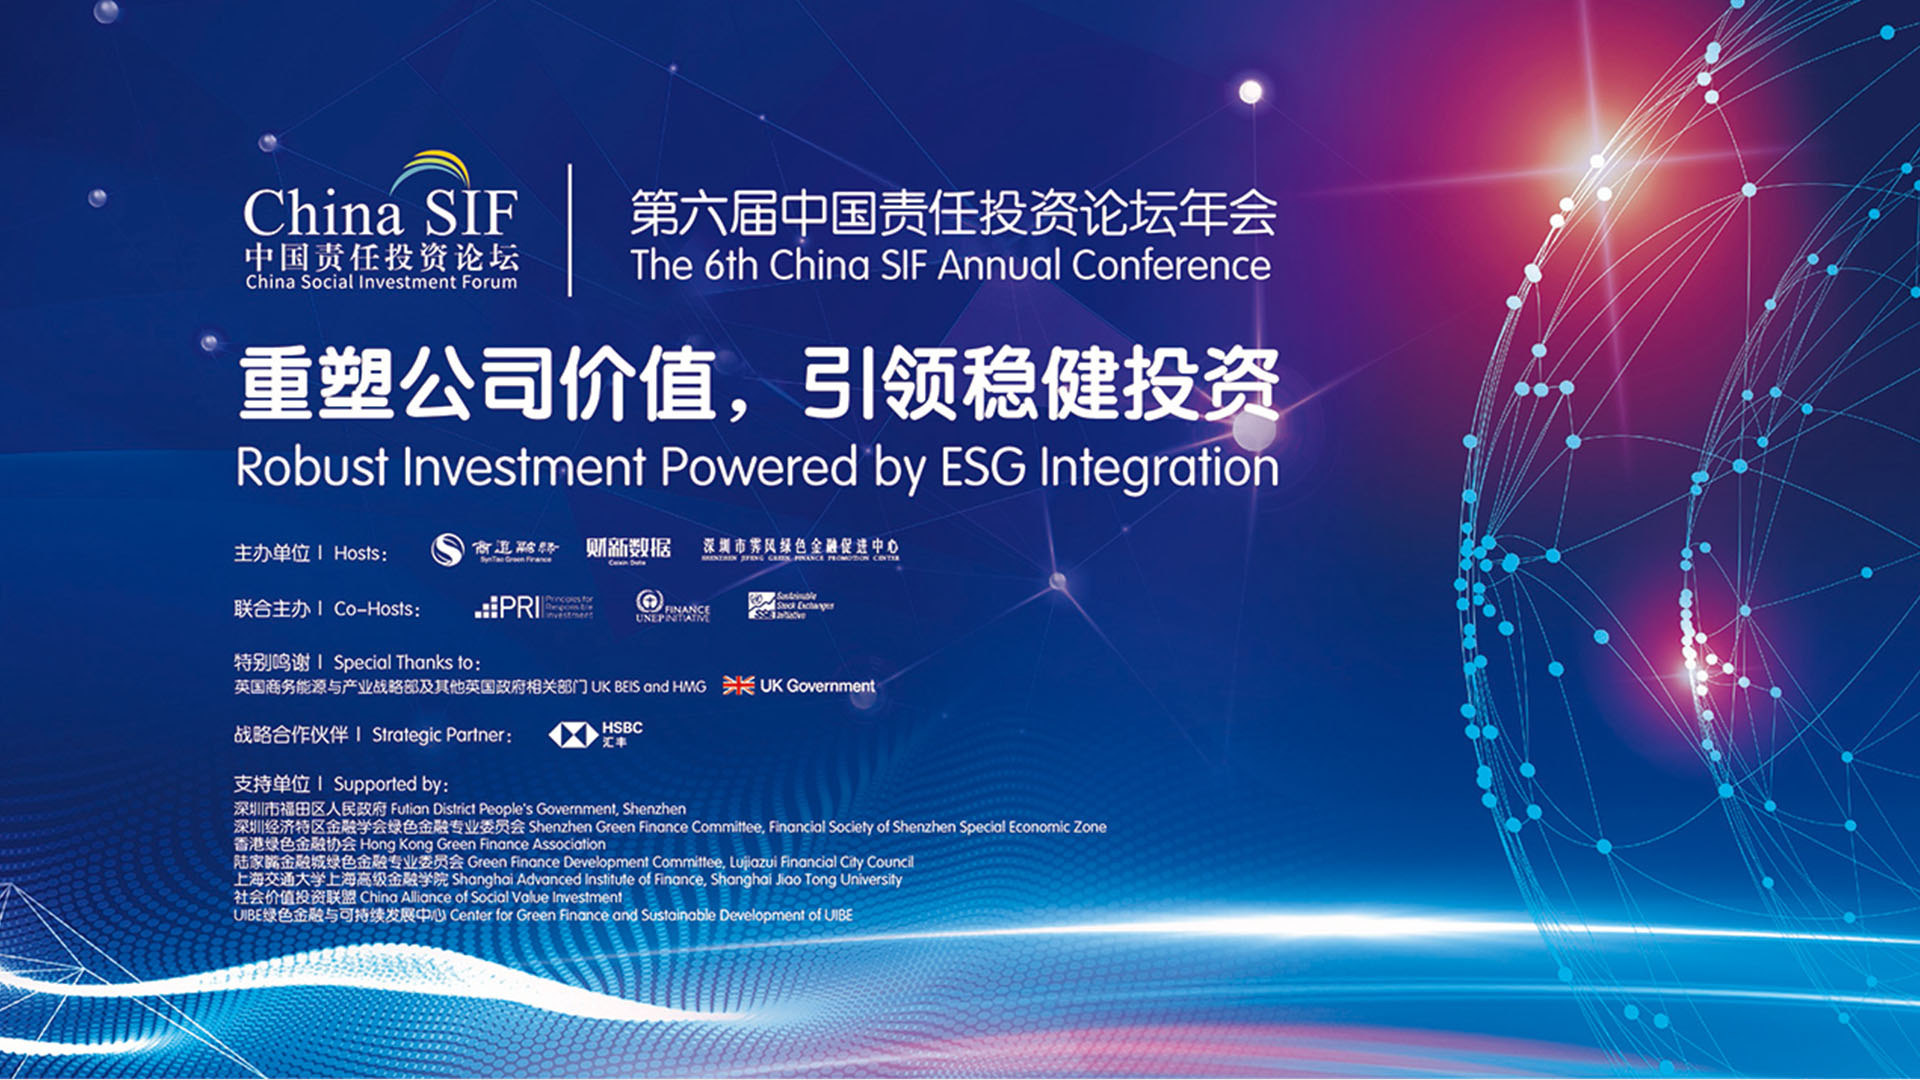 The 6th China SIF Annual Conference